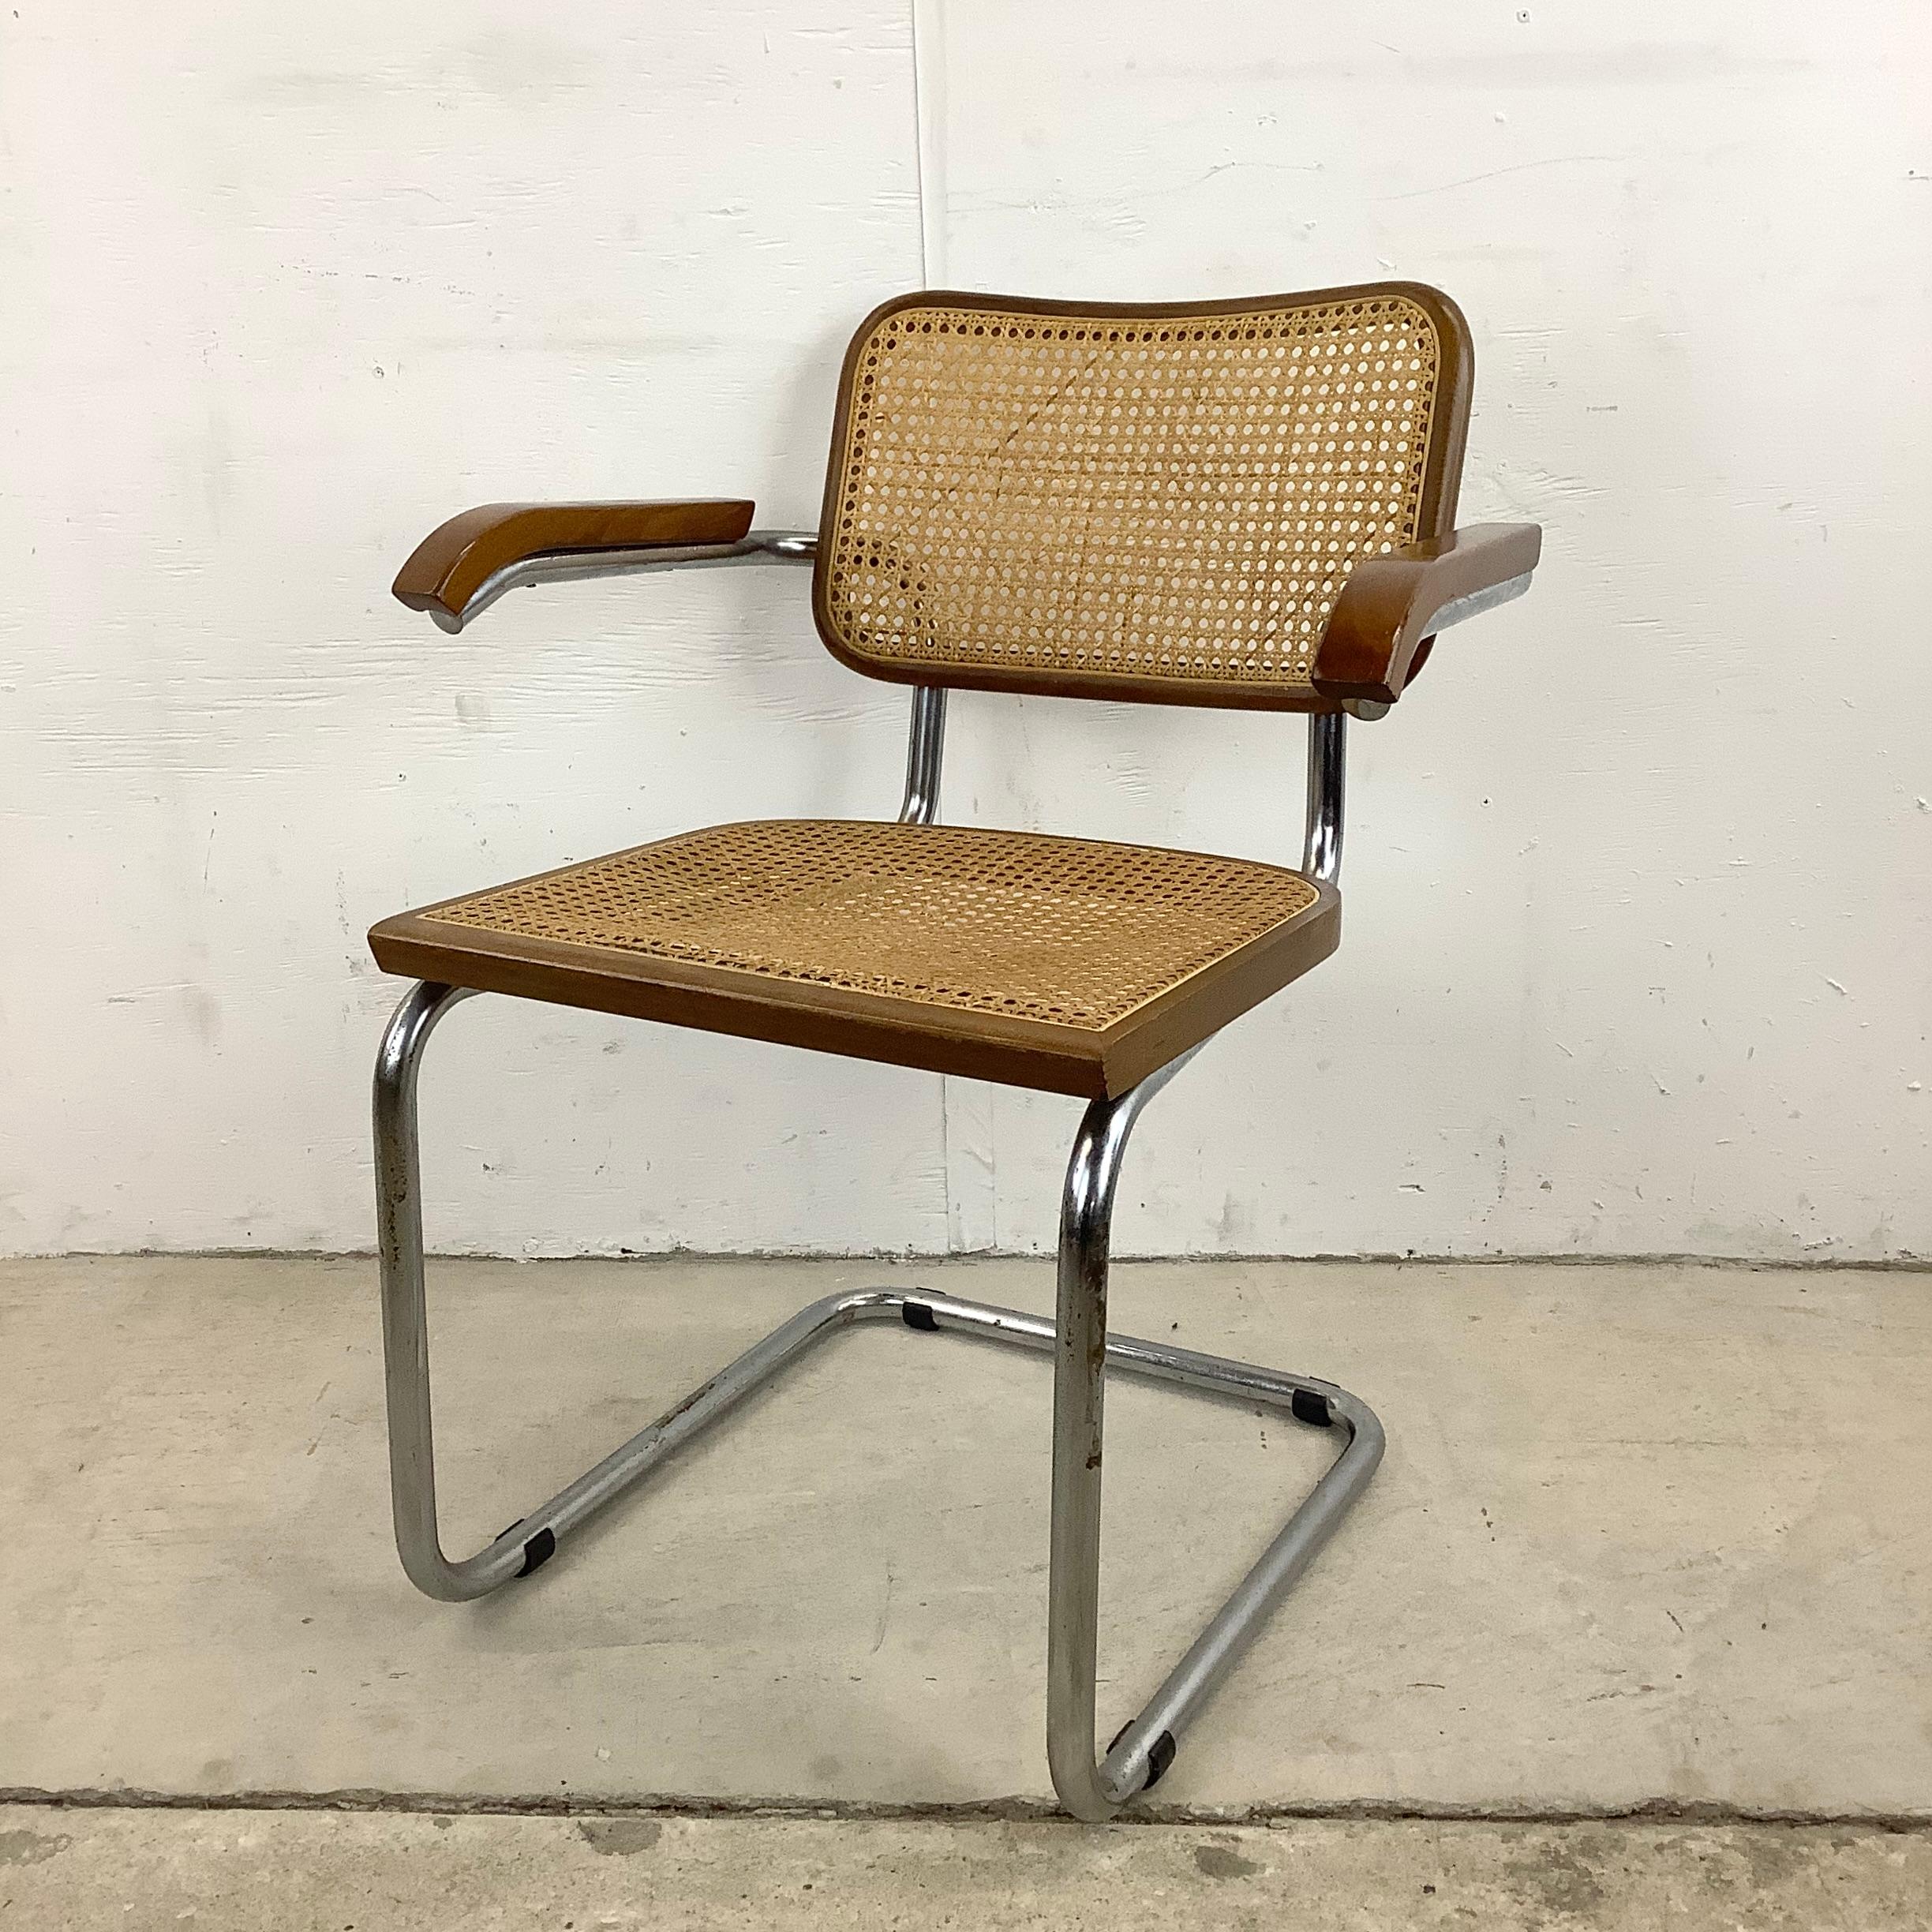 Midcentury Cesca Style Cane Seat Dining Chair, Made in Italy 1